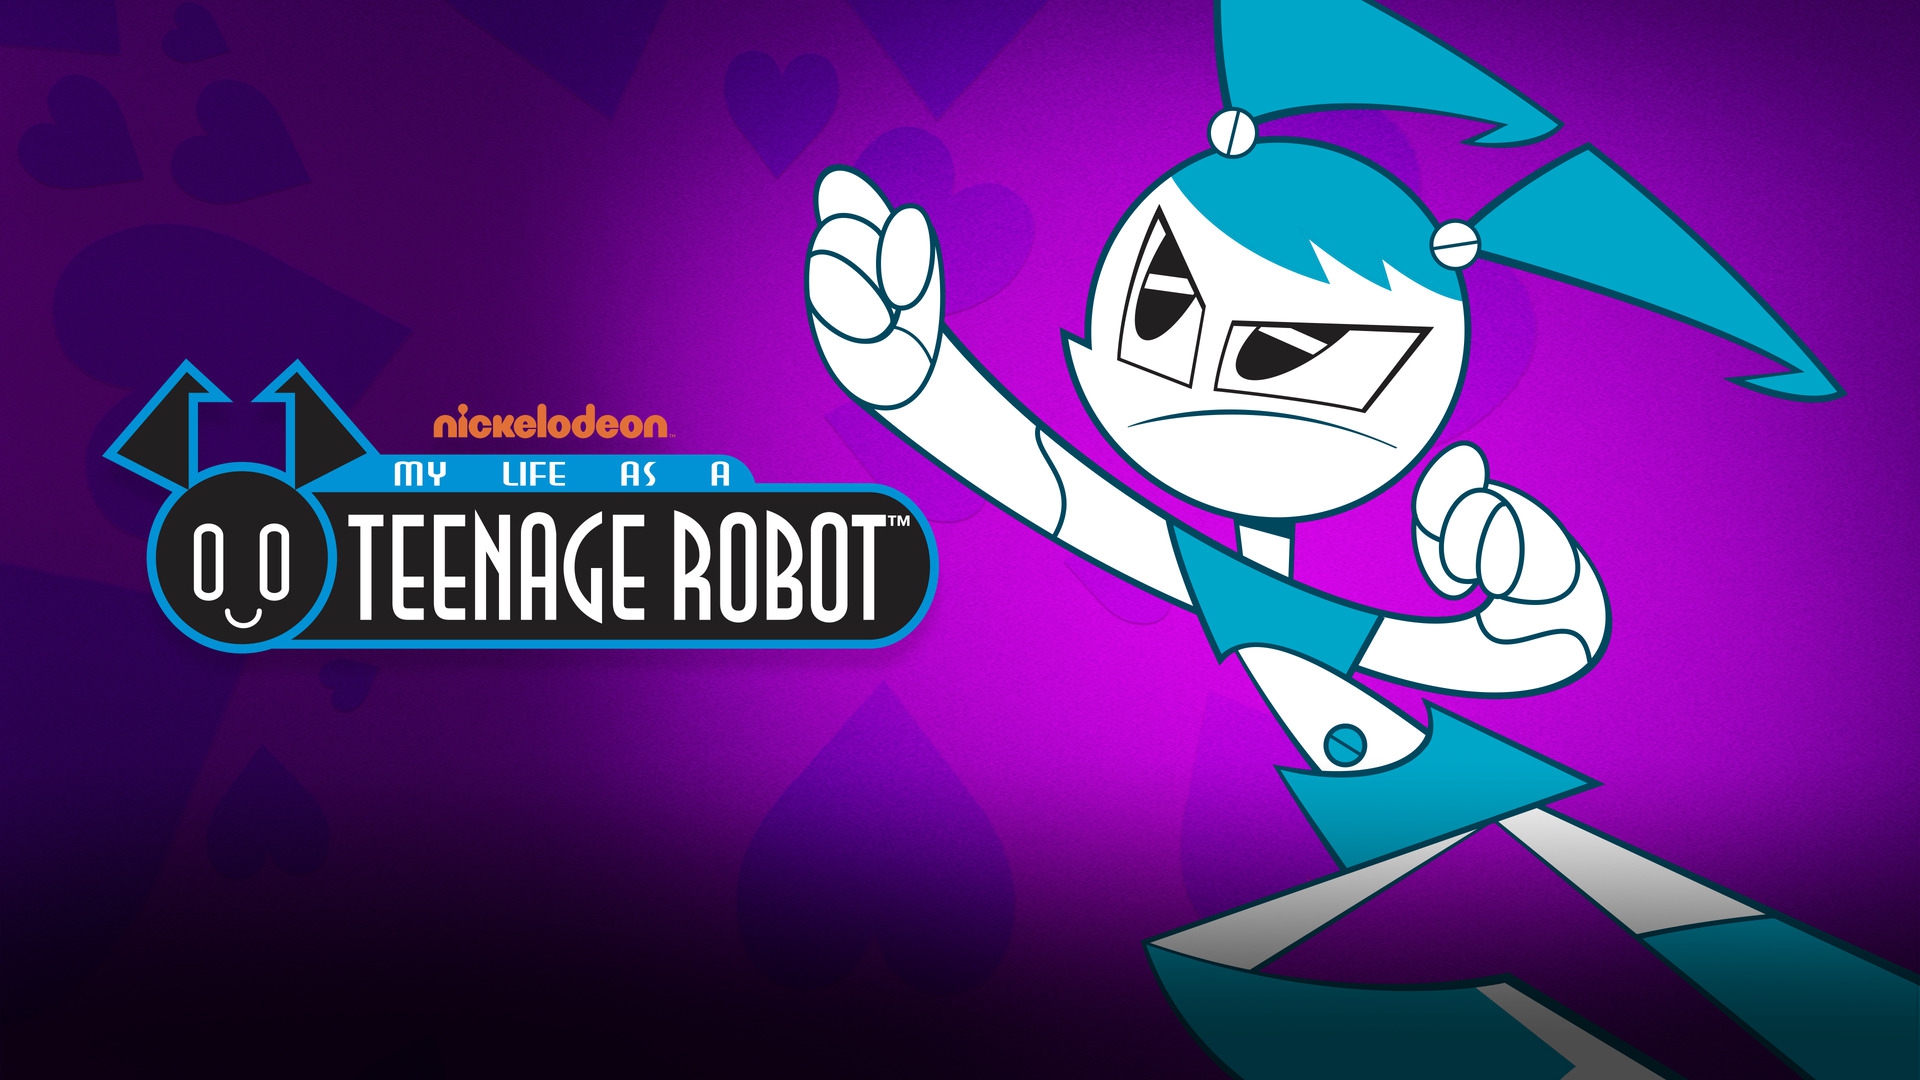 My Life As A Teenage Robot Season 1 Episodes Streaming Online for Free. The Roku Channel